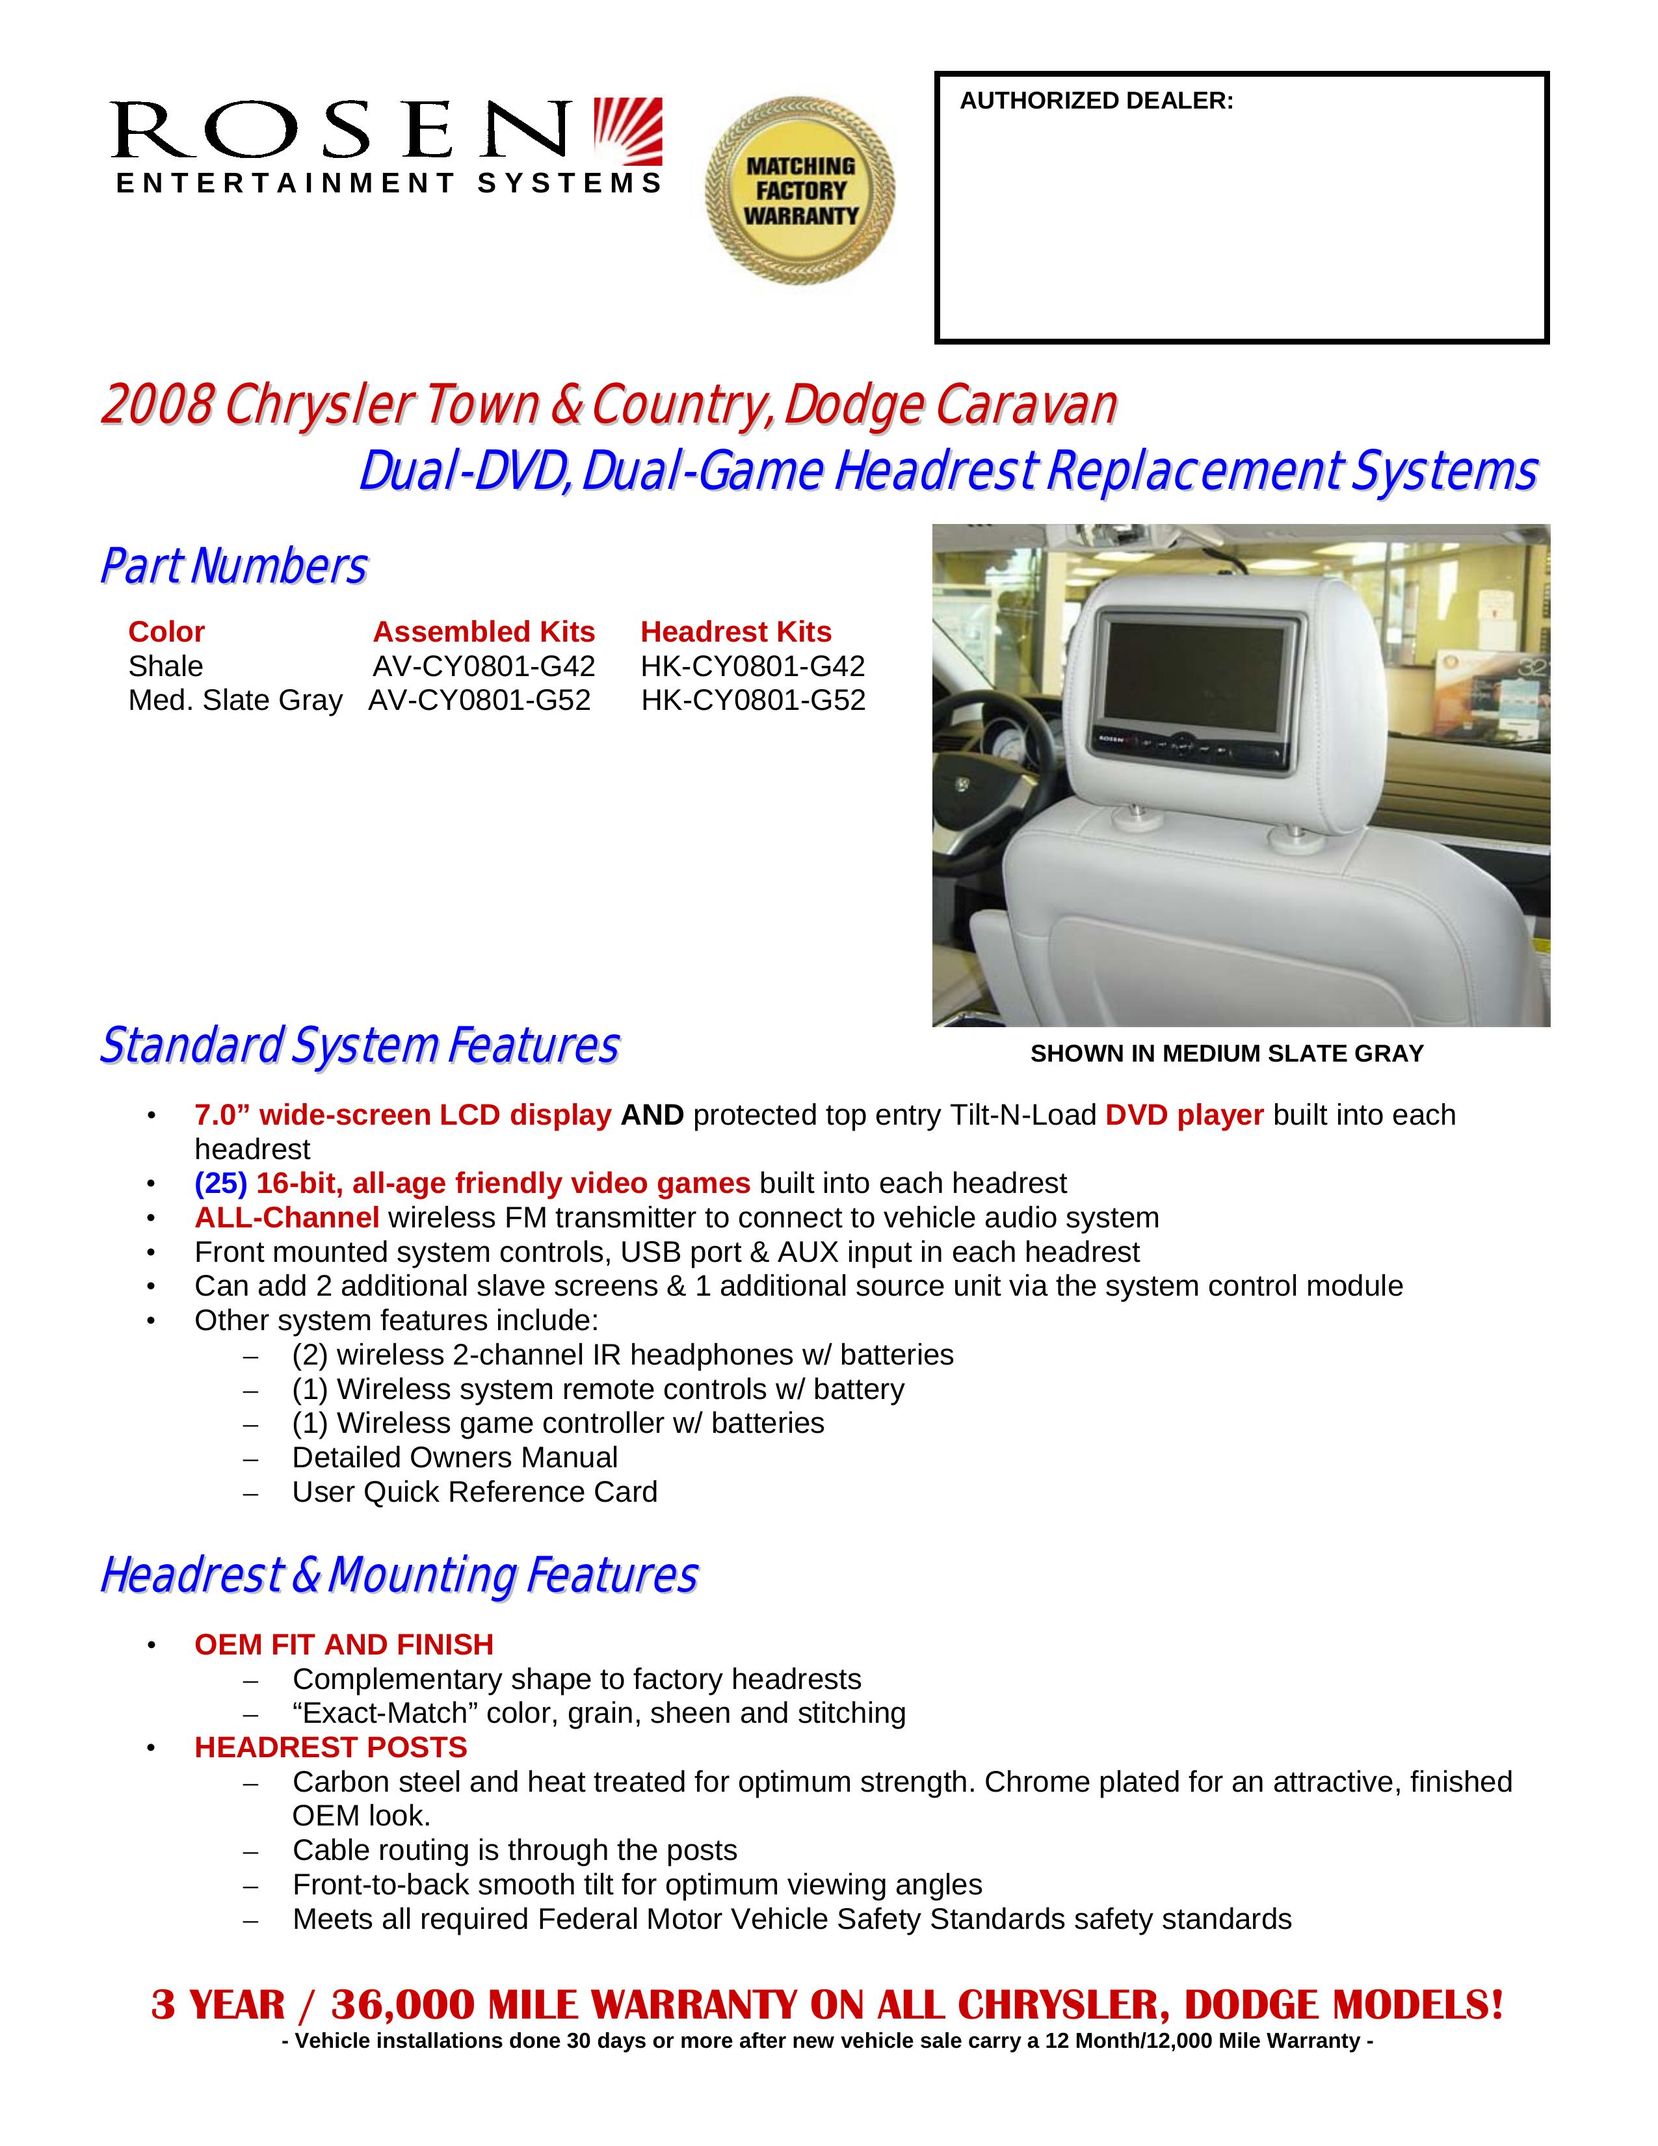 Rosen Entertainment Systems HK-CY0801-G42 Car Video System User Manual